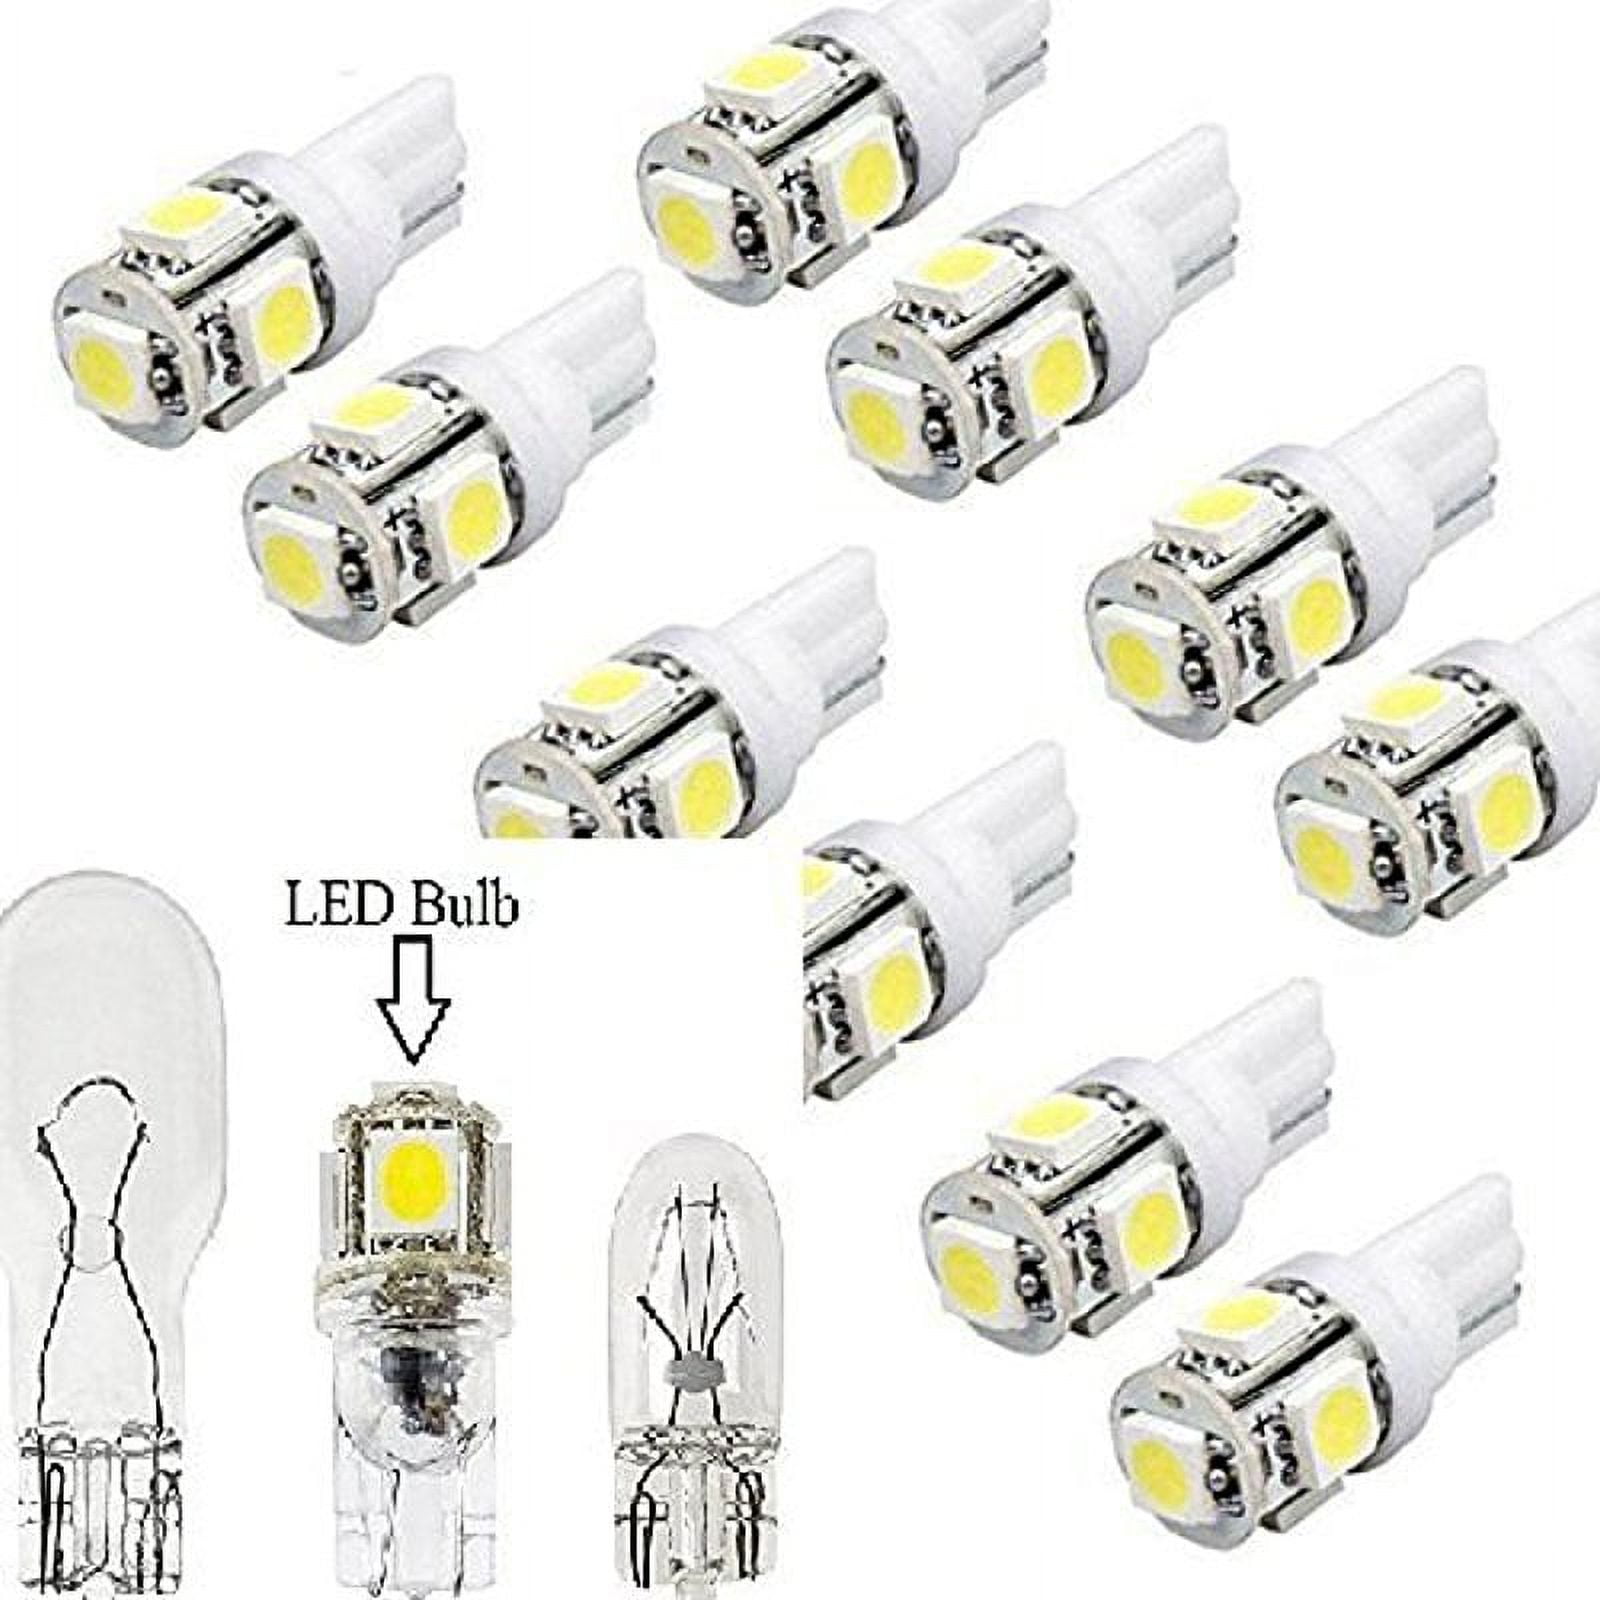 Buy LED bulb for car T10 (W5W/194) 6000K 12V 1W in ABCLED store for 4.90€